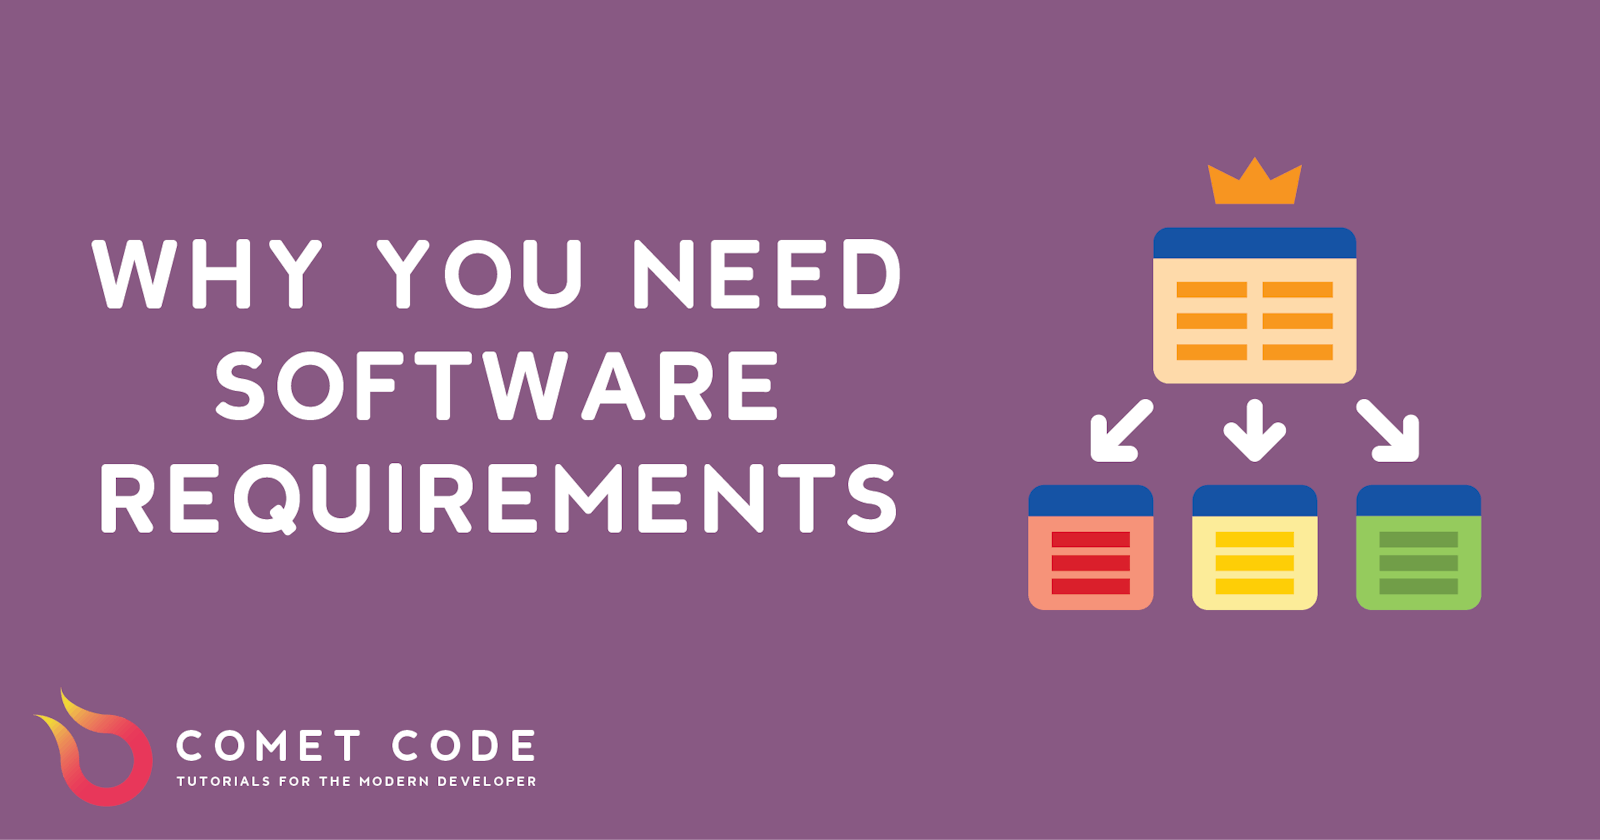 Why you need Software Requirements for your Application